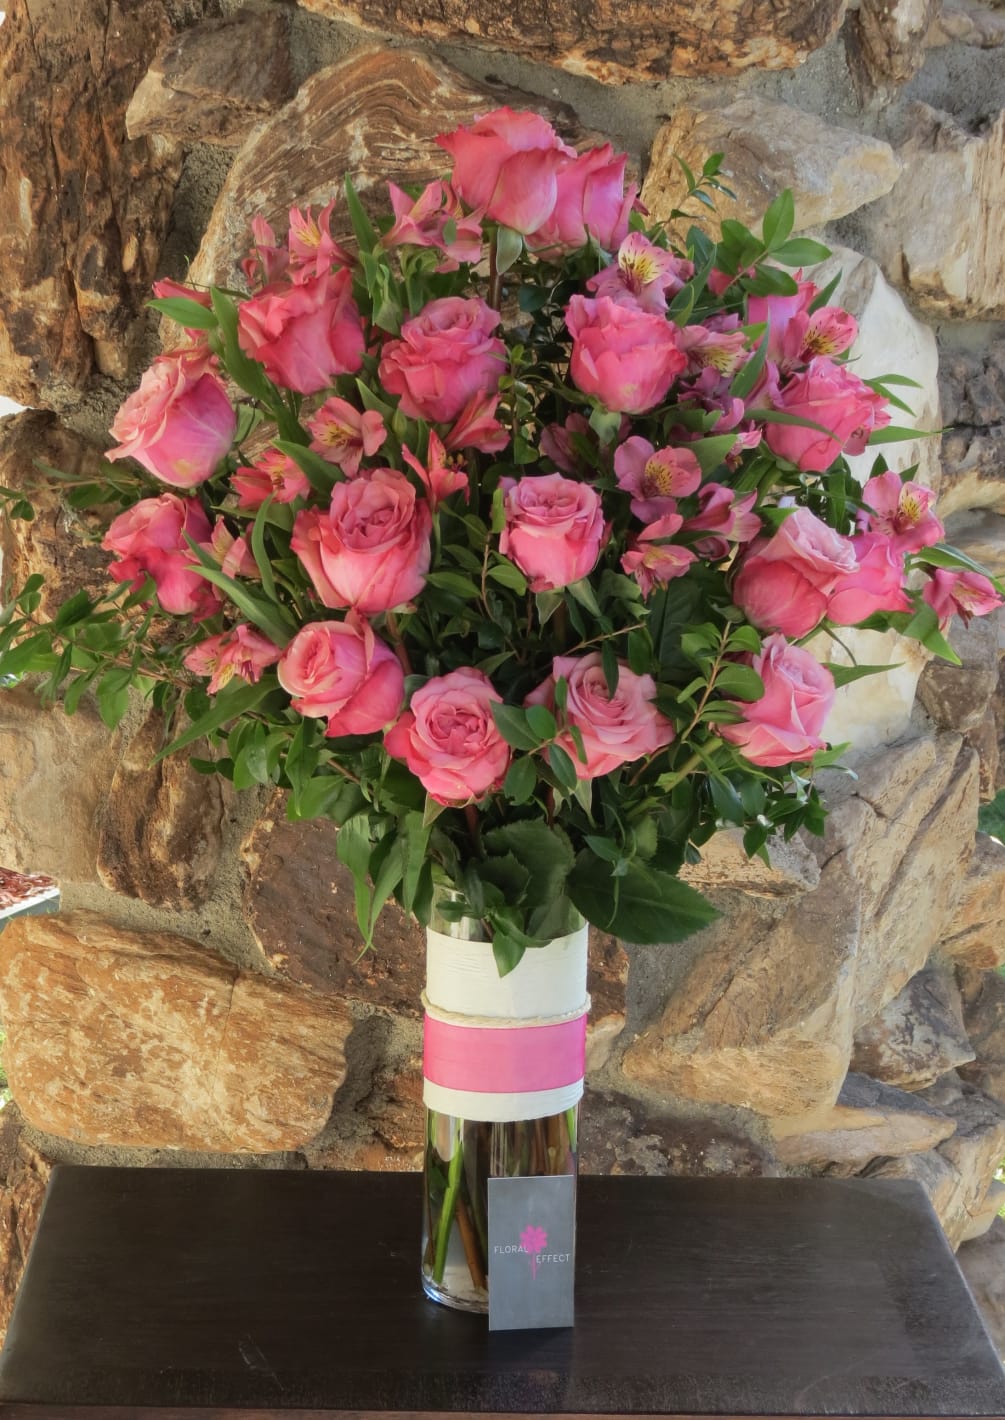 24 Roses arranged in a glass vase. Other colors available